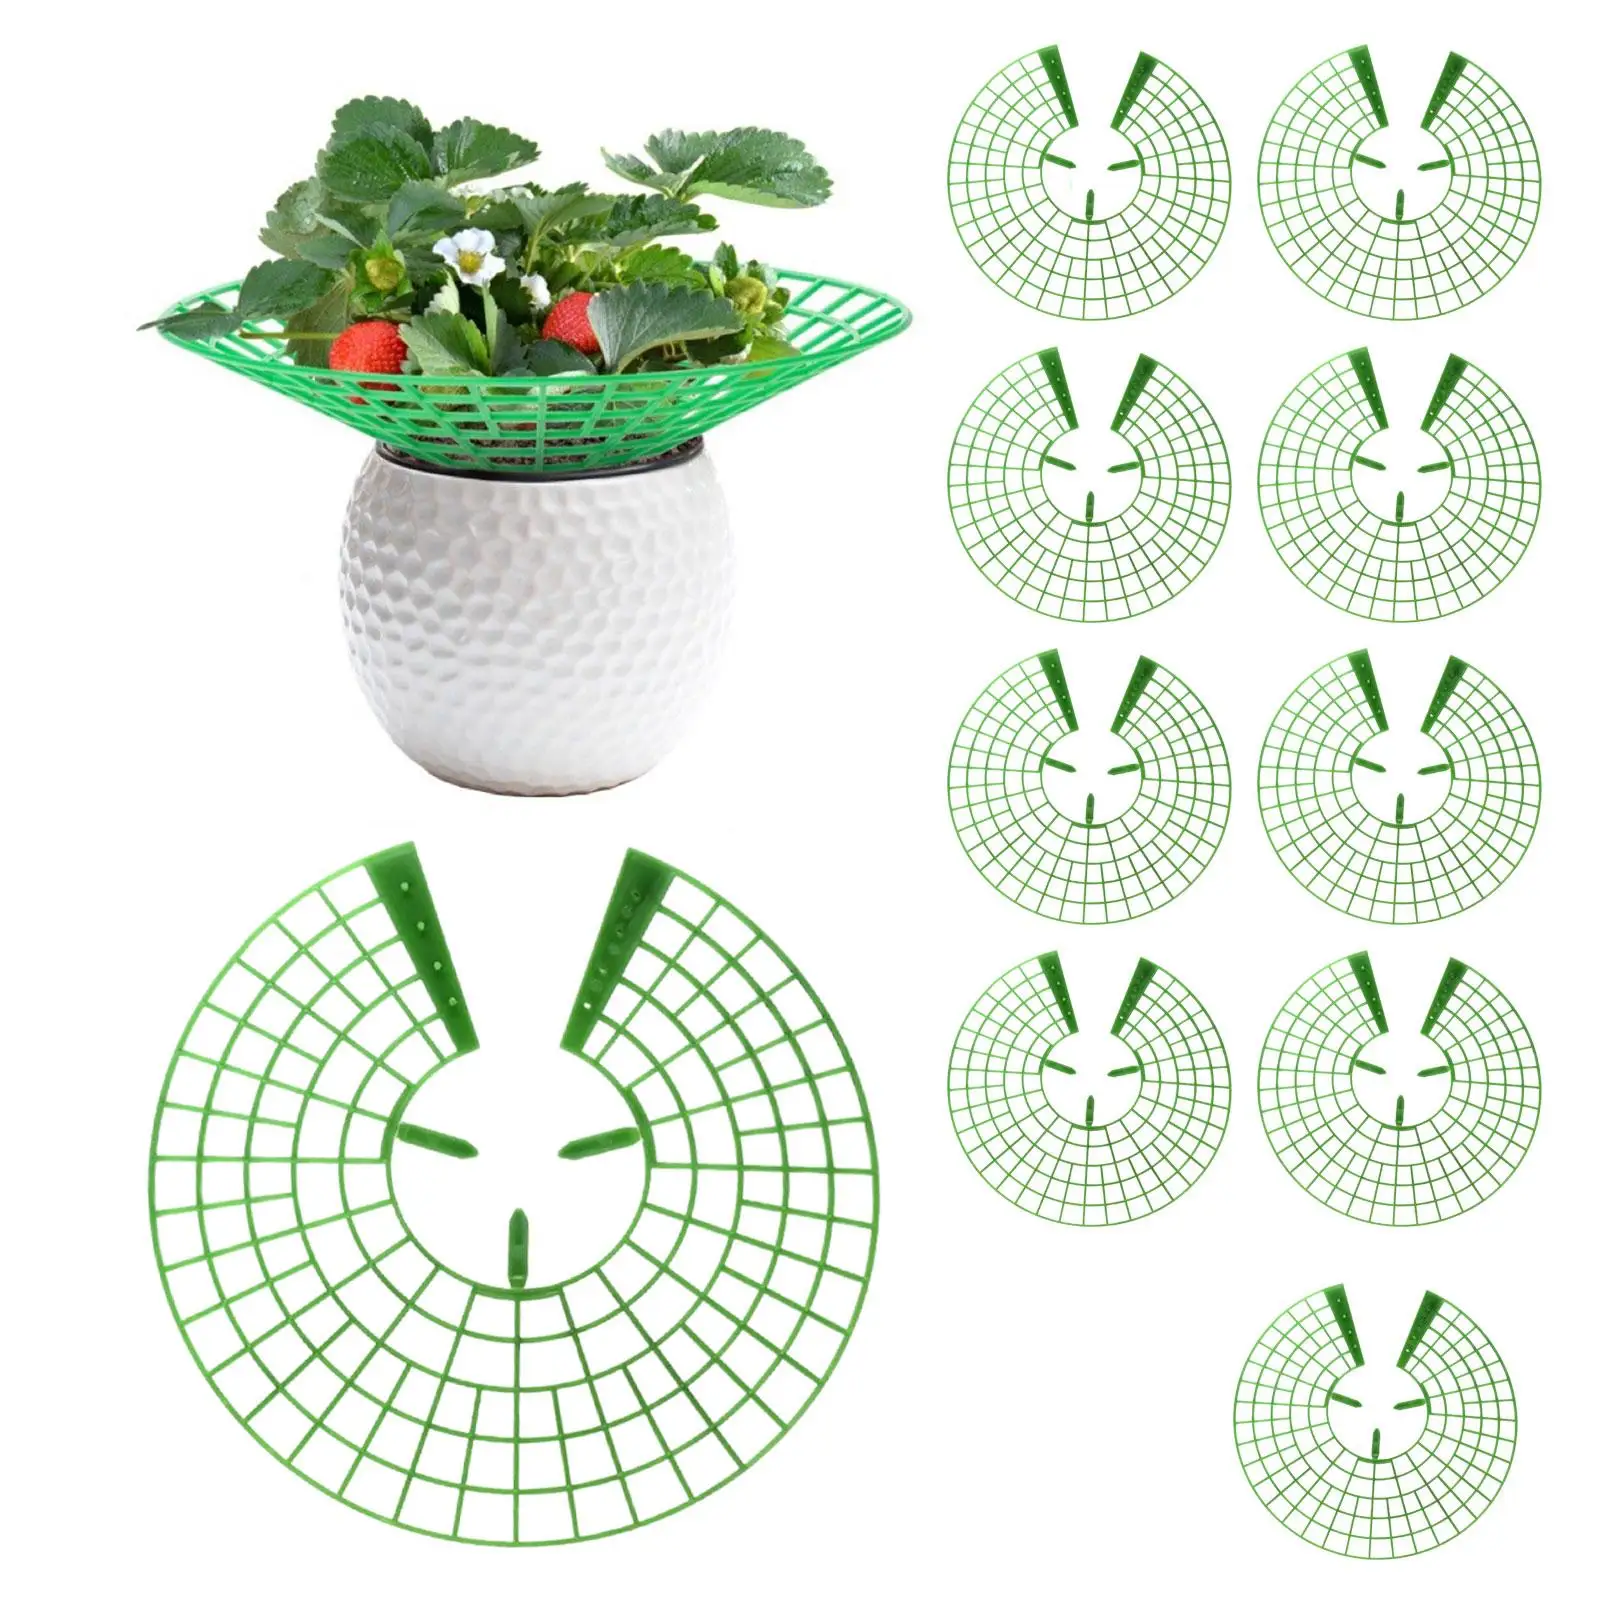 Multifunction Strawberry Supports Plant Growing Stand Plant Holder Durable Sturdy for Garden Tools